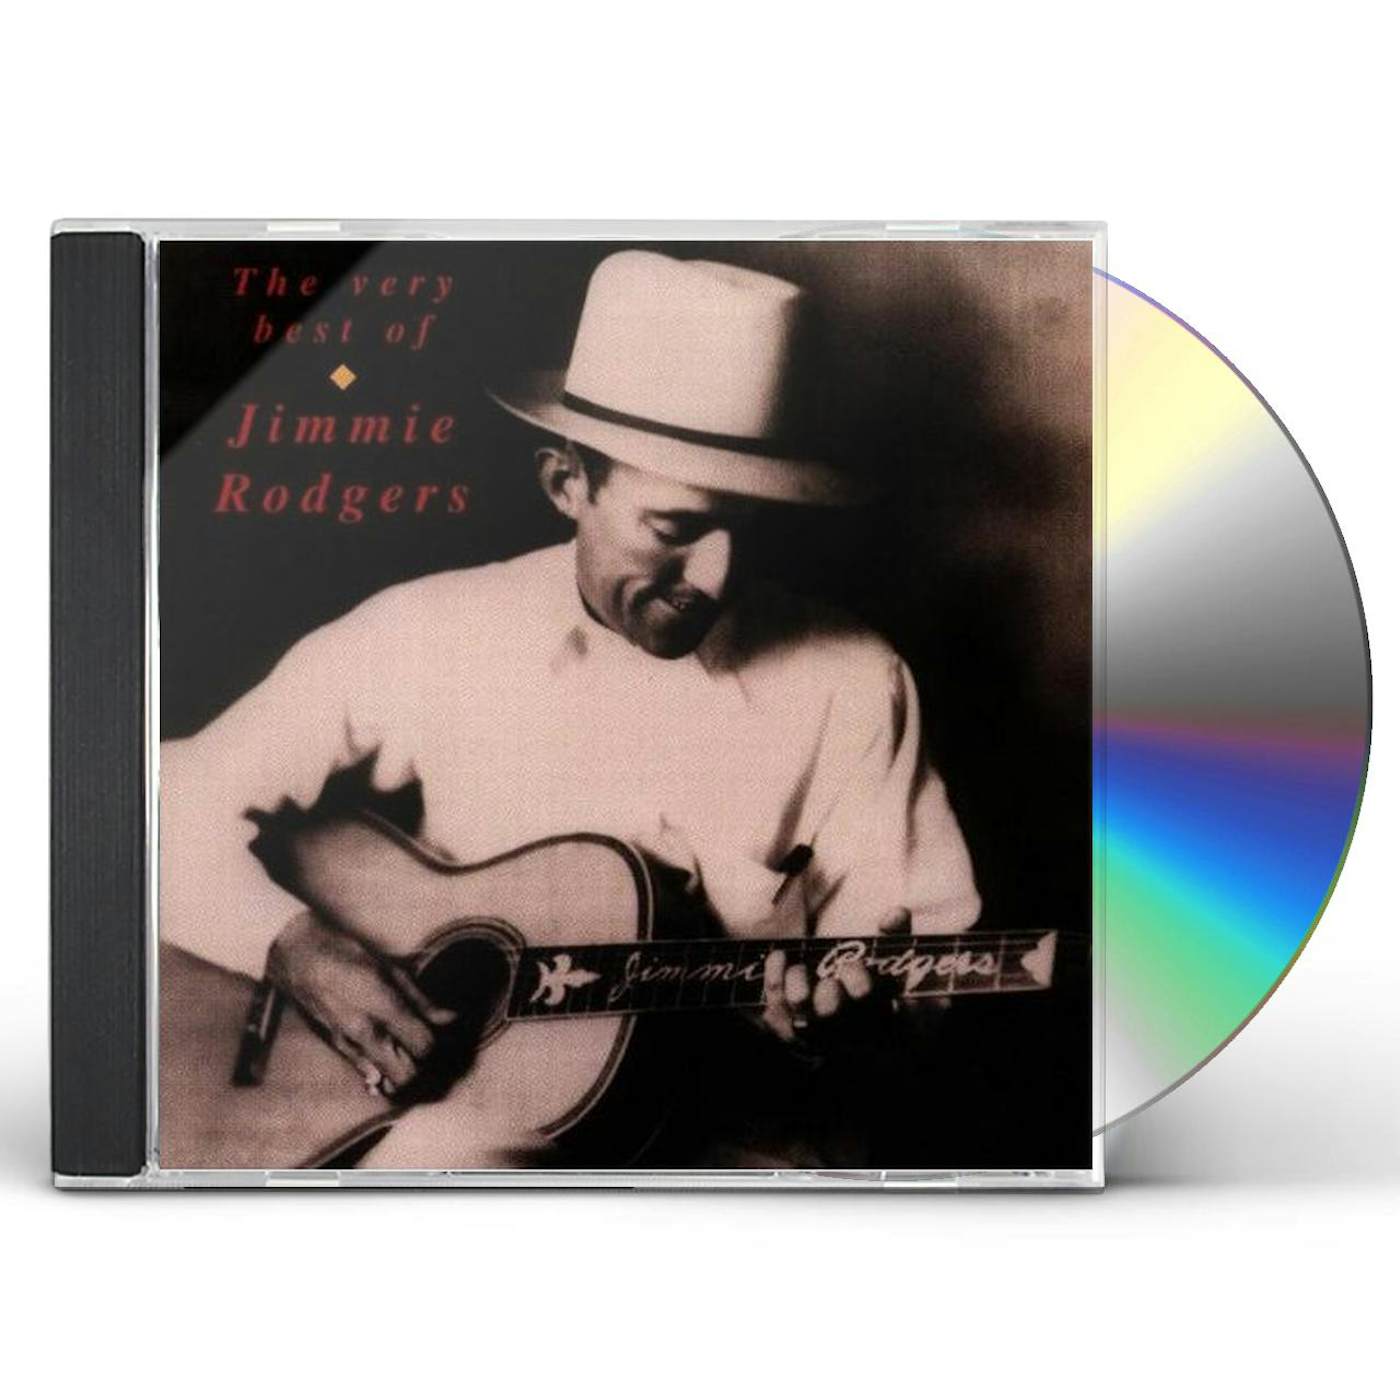 Jimmie Rodgers VERY BEST OF CD